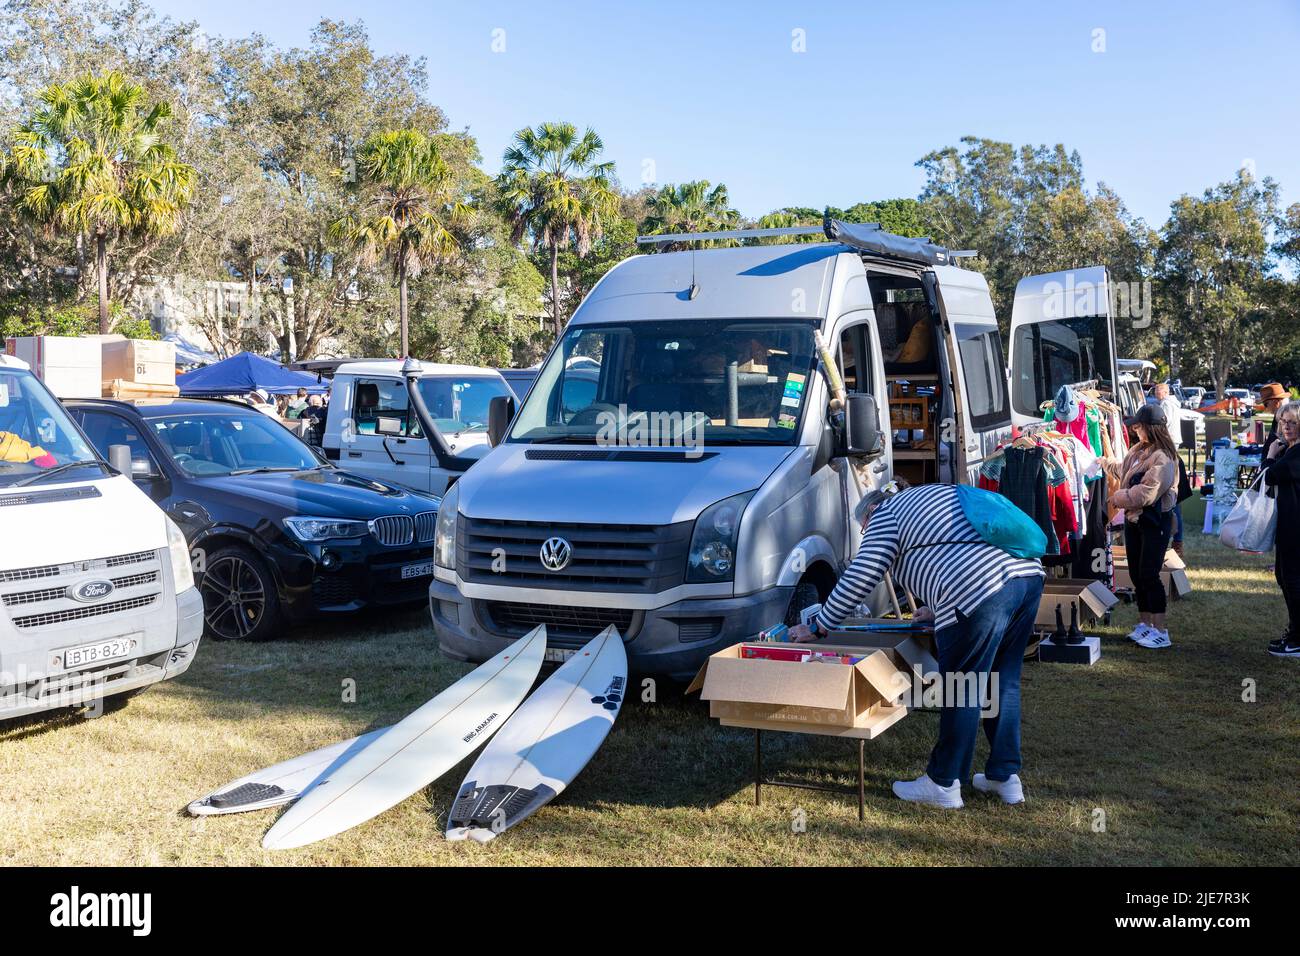 Unwanted goods and items for sale including surfboards at a car boot sale in Avalon Beach,Sydney,NSW,Australia June 2022 Stock Photo